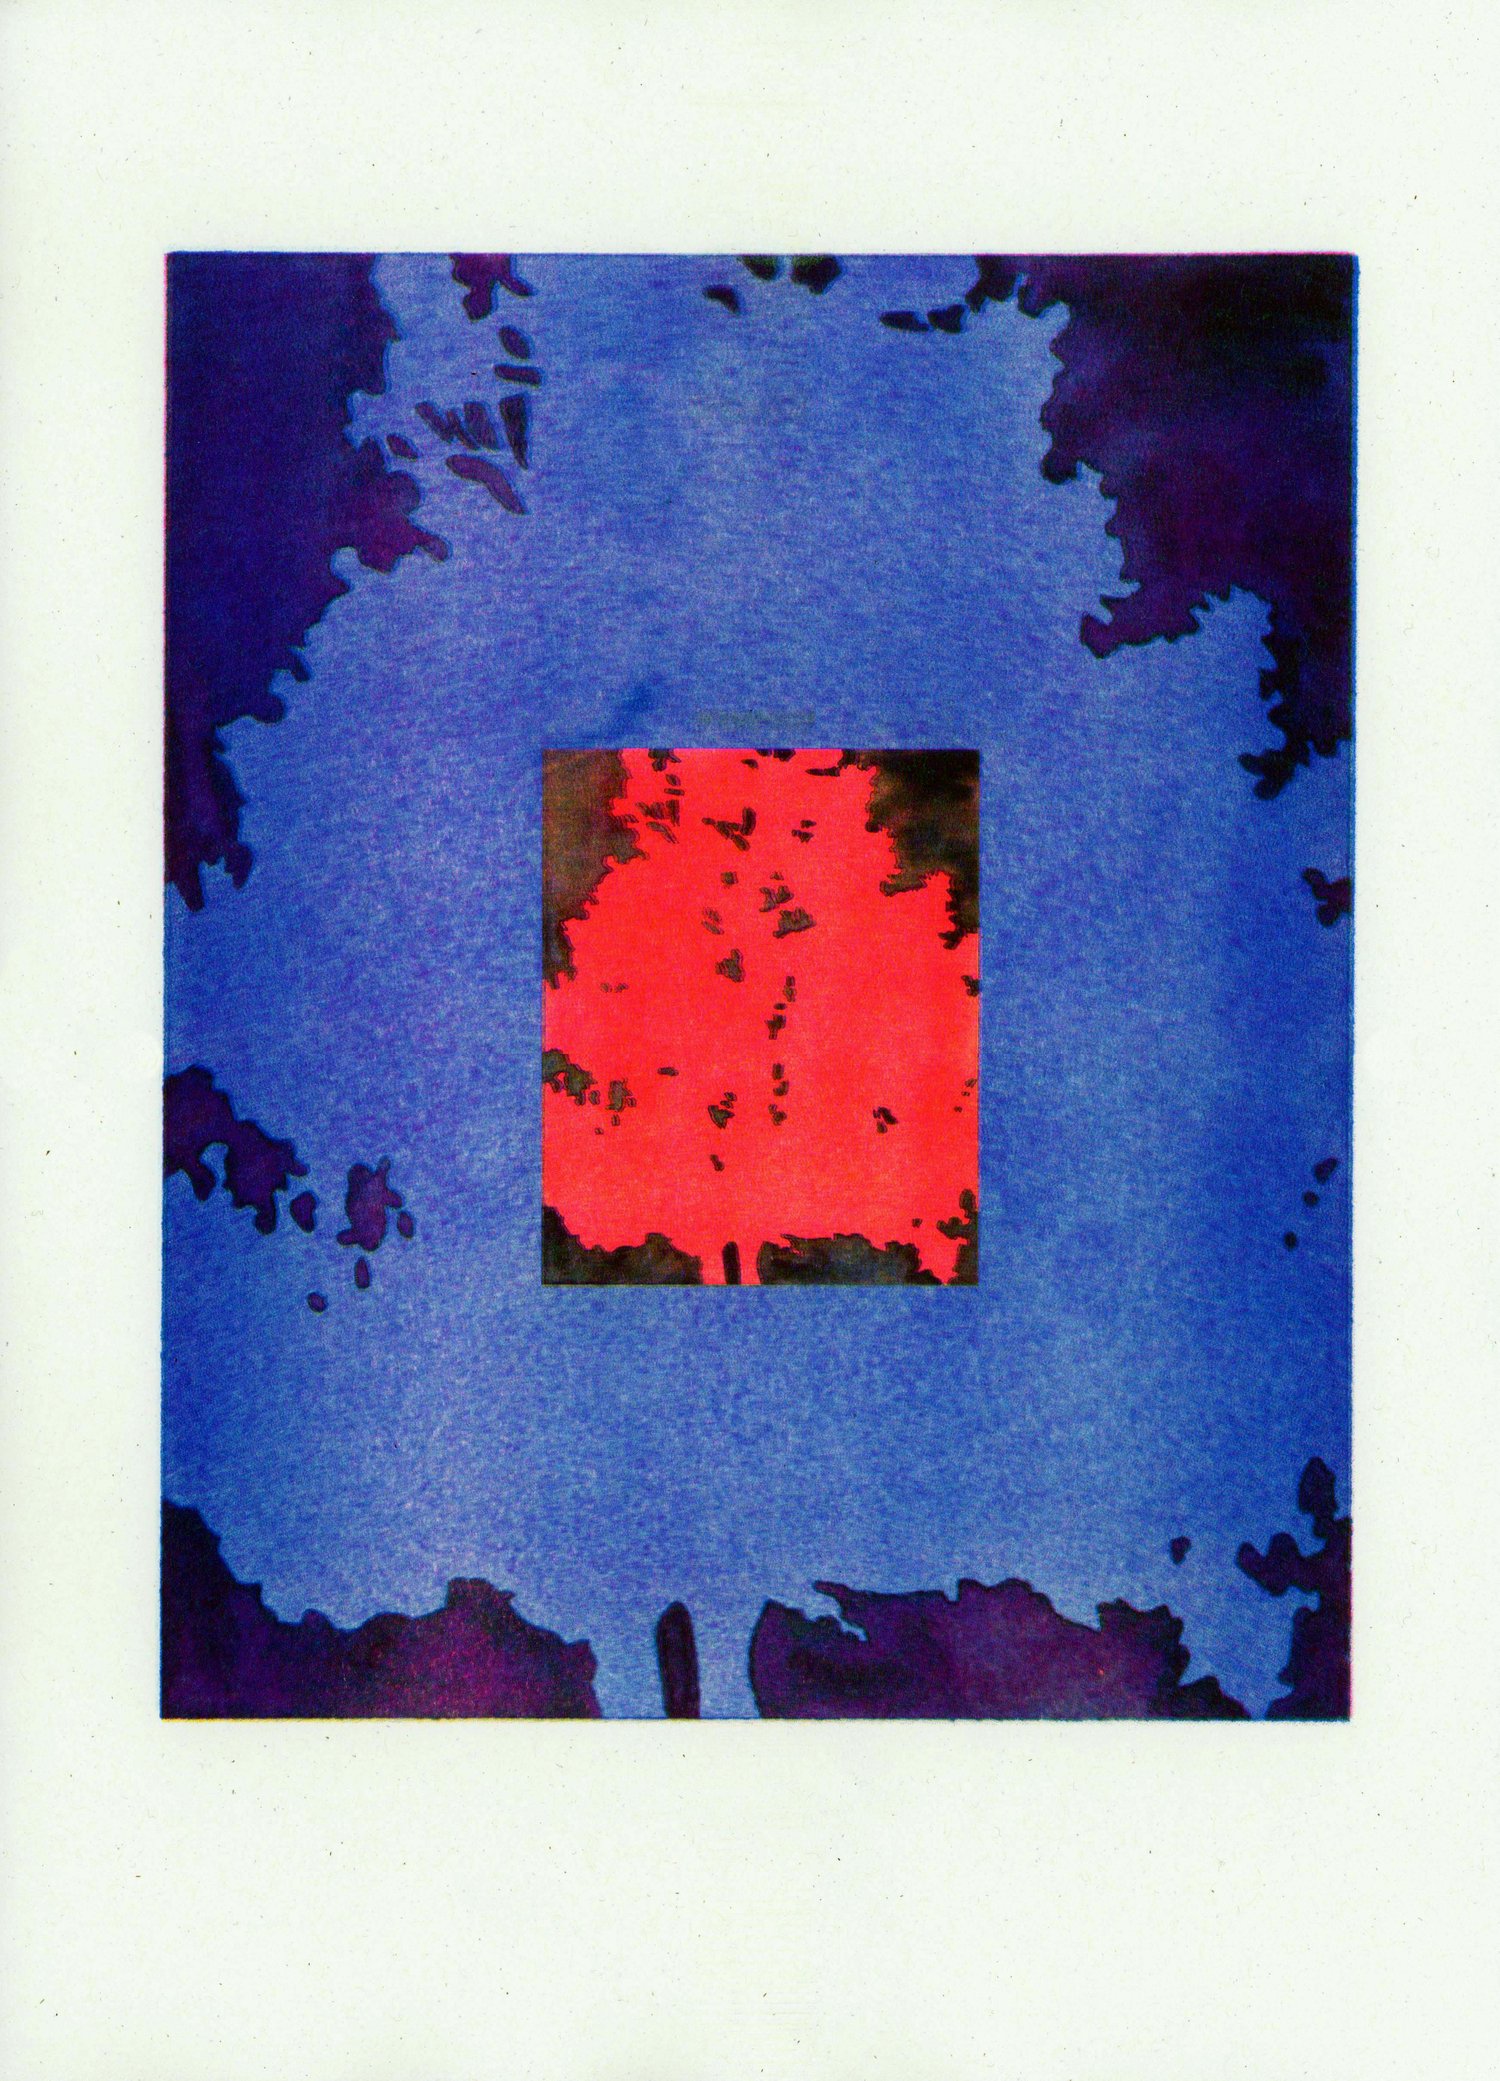 Tree Silhouette - Reddish Pink and Blue